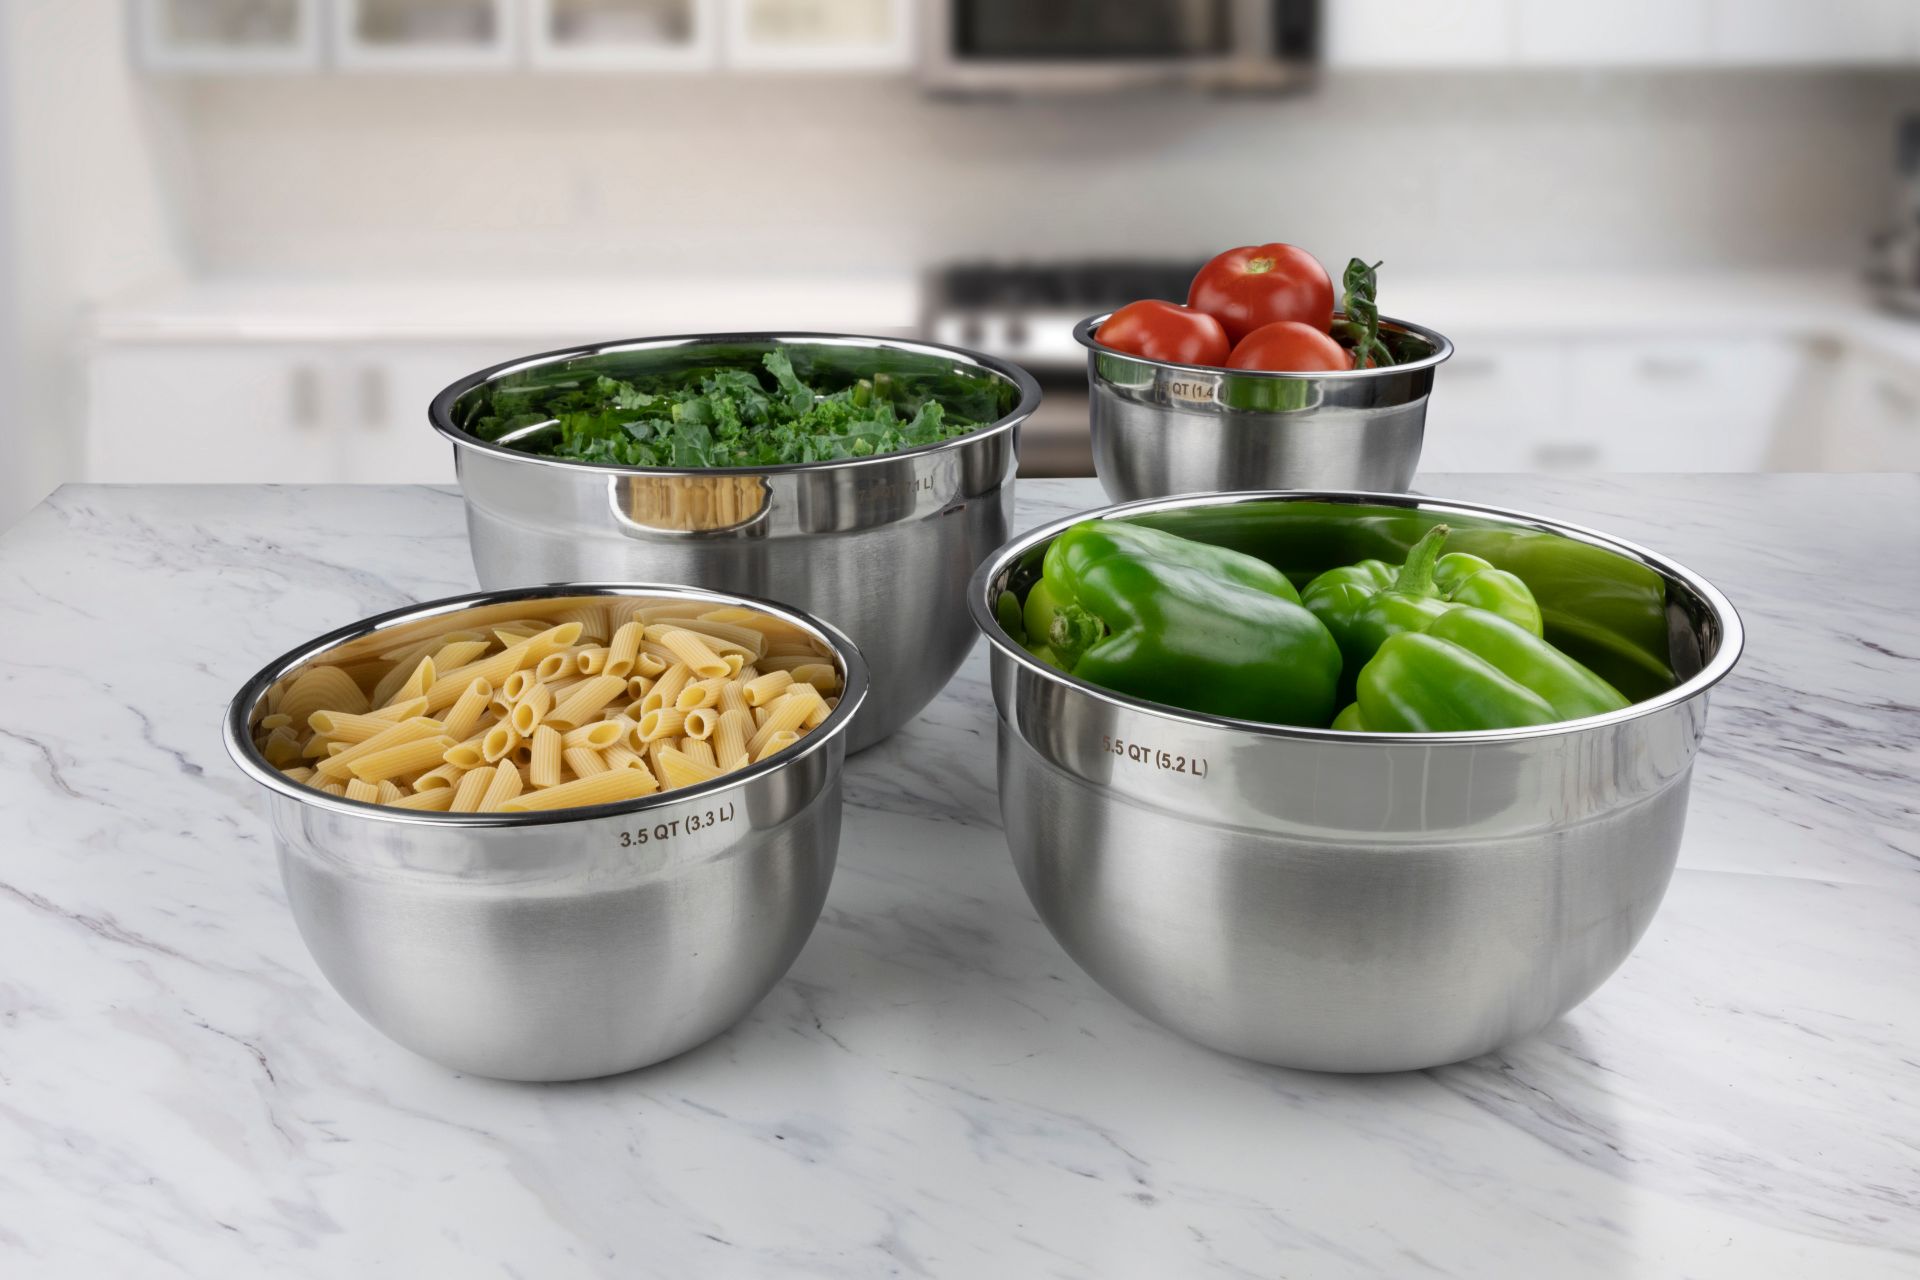 3.5-Quart Brushed Stainless Steel Bowl + Flex Edge Accessory Pack